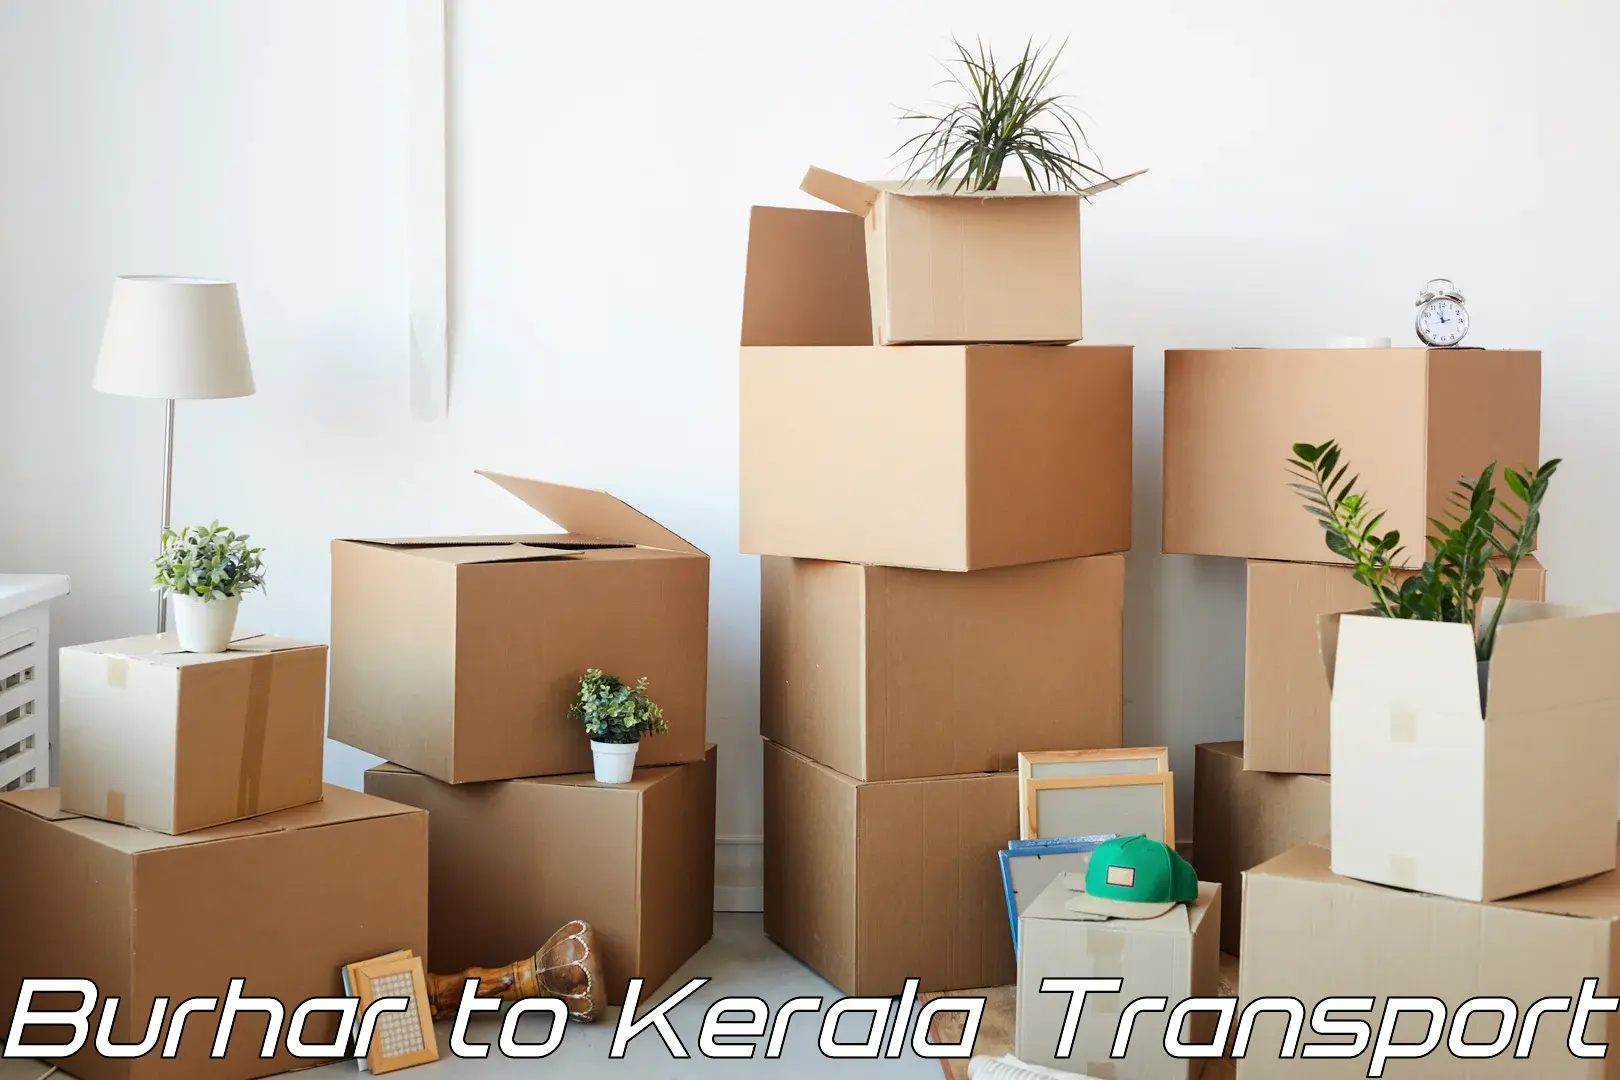 Delivery service Burhar to Kerala